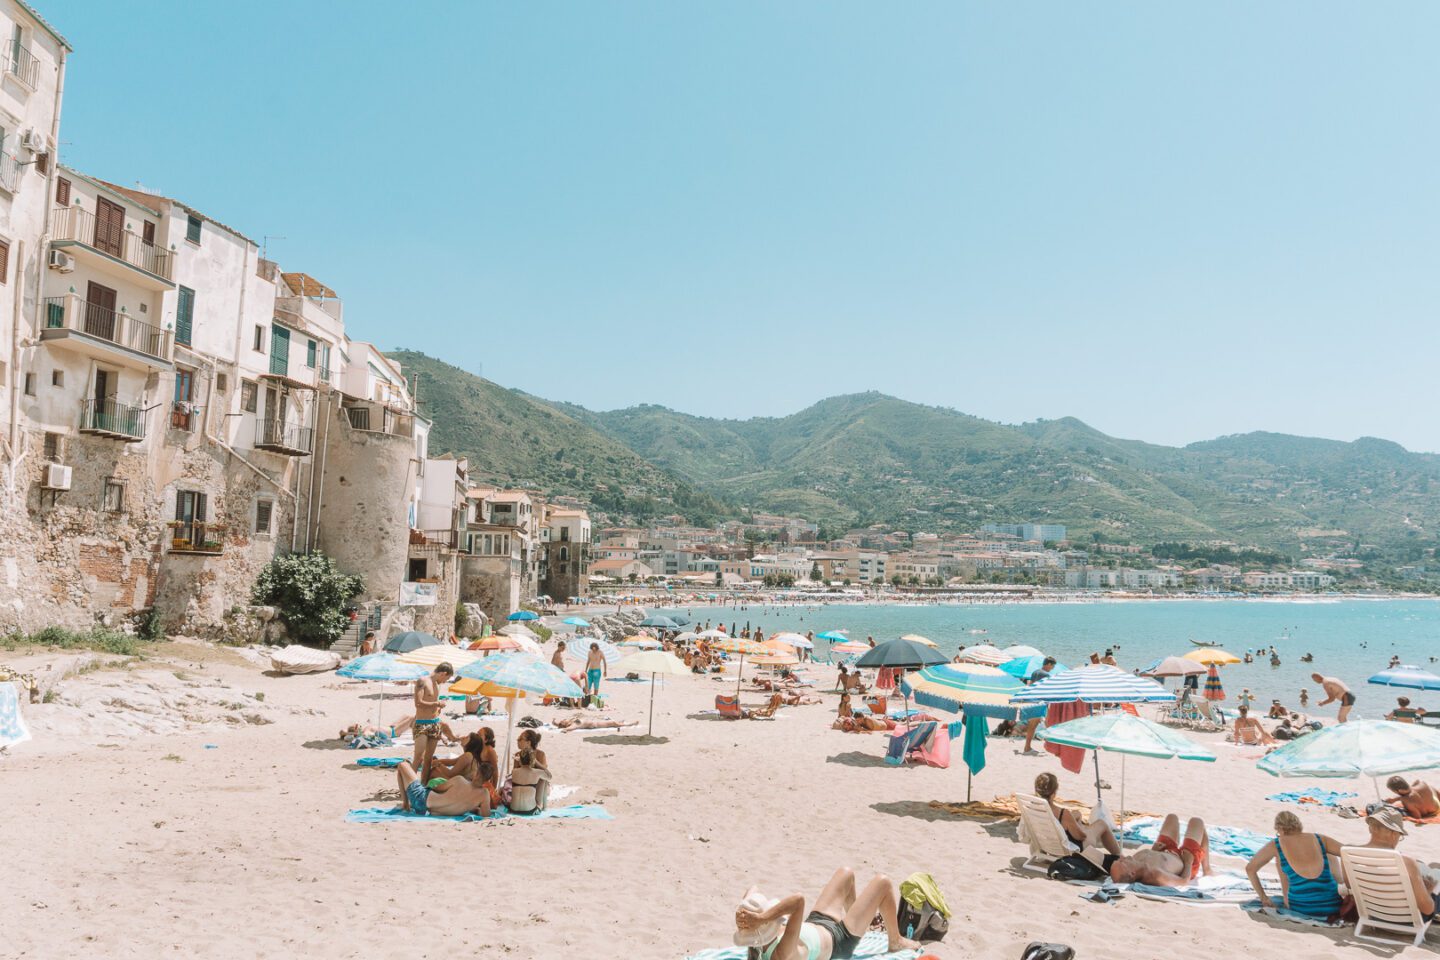 People and colourful umbrellas scattered along the Cefalu beach in -- an amazing stop on this 7-day Sicily Itinerary